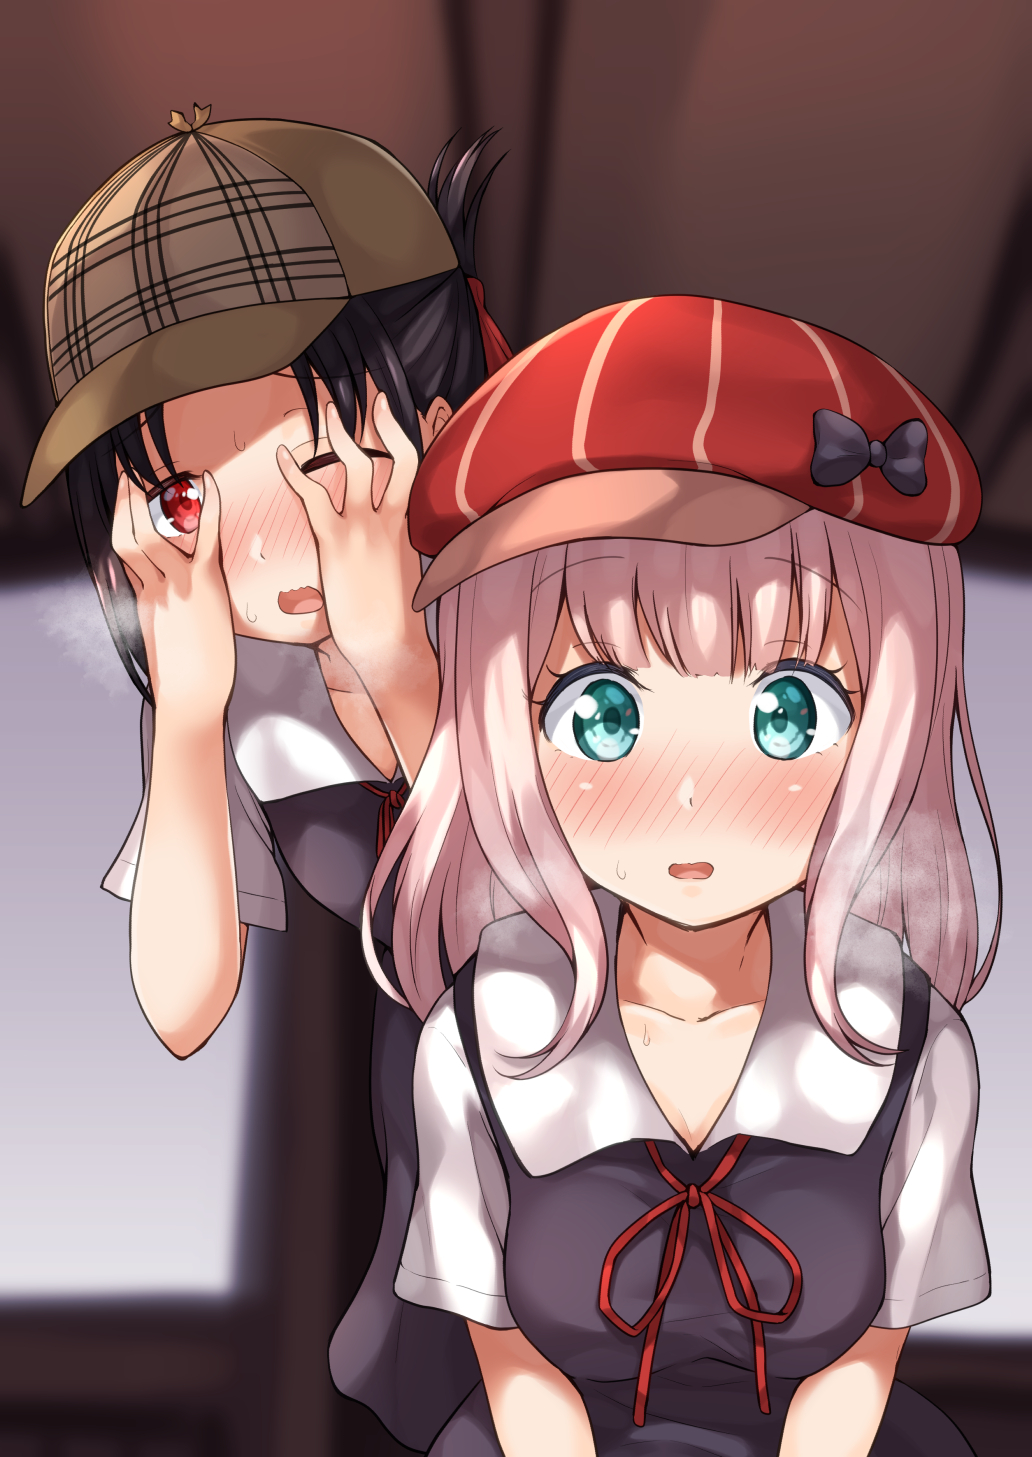 Detectives Chika and Kaguya see what they haven't seen yet ... by みやび